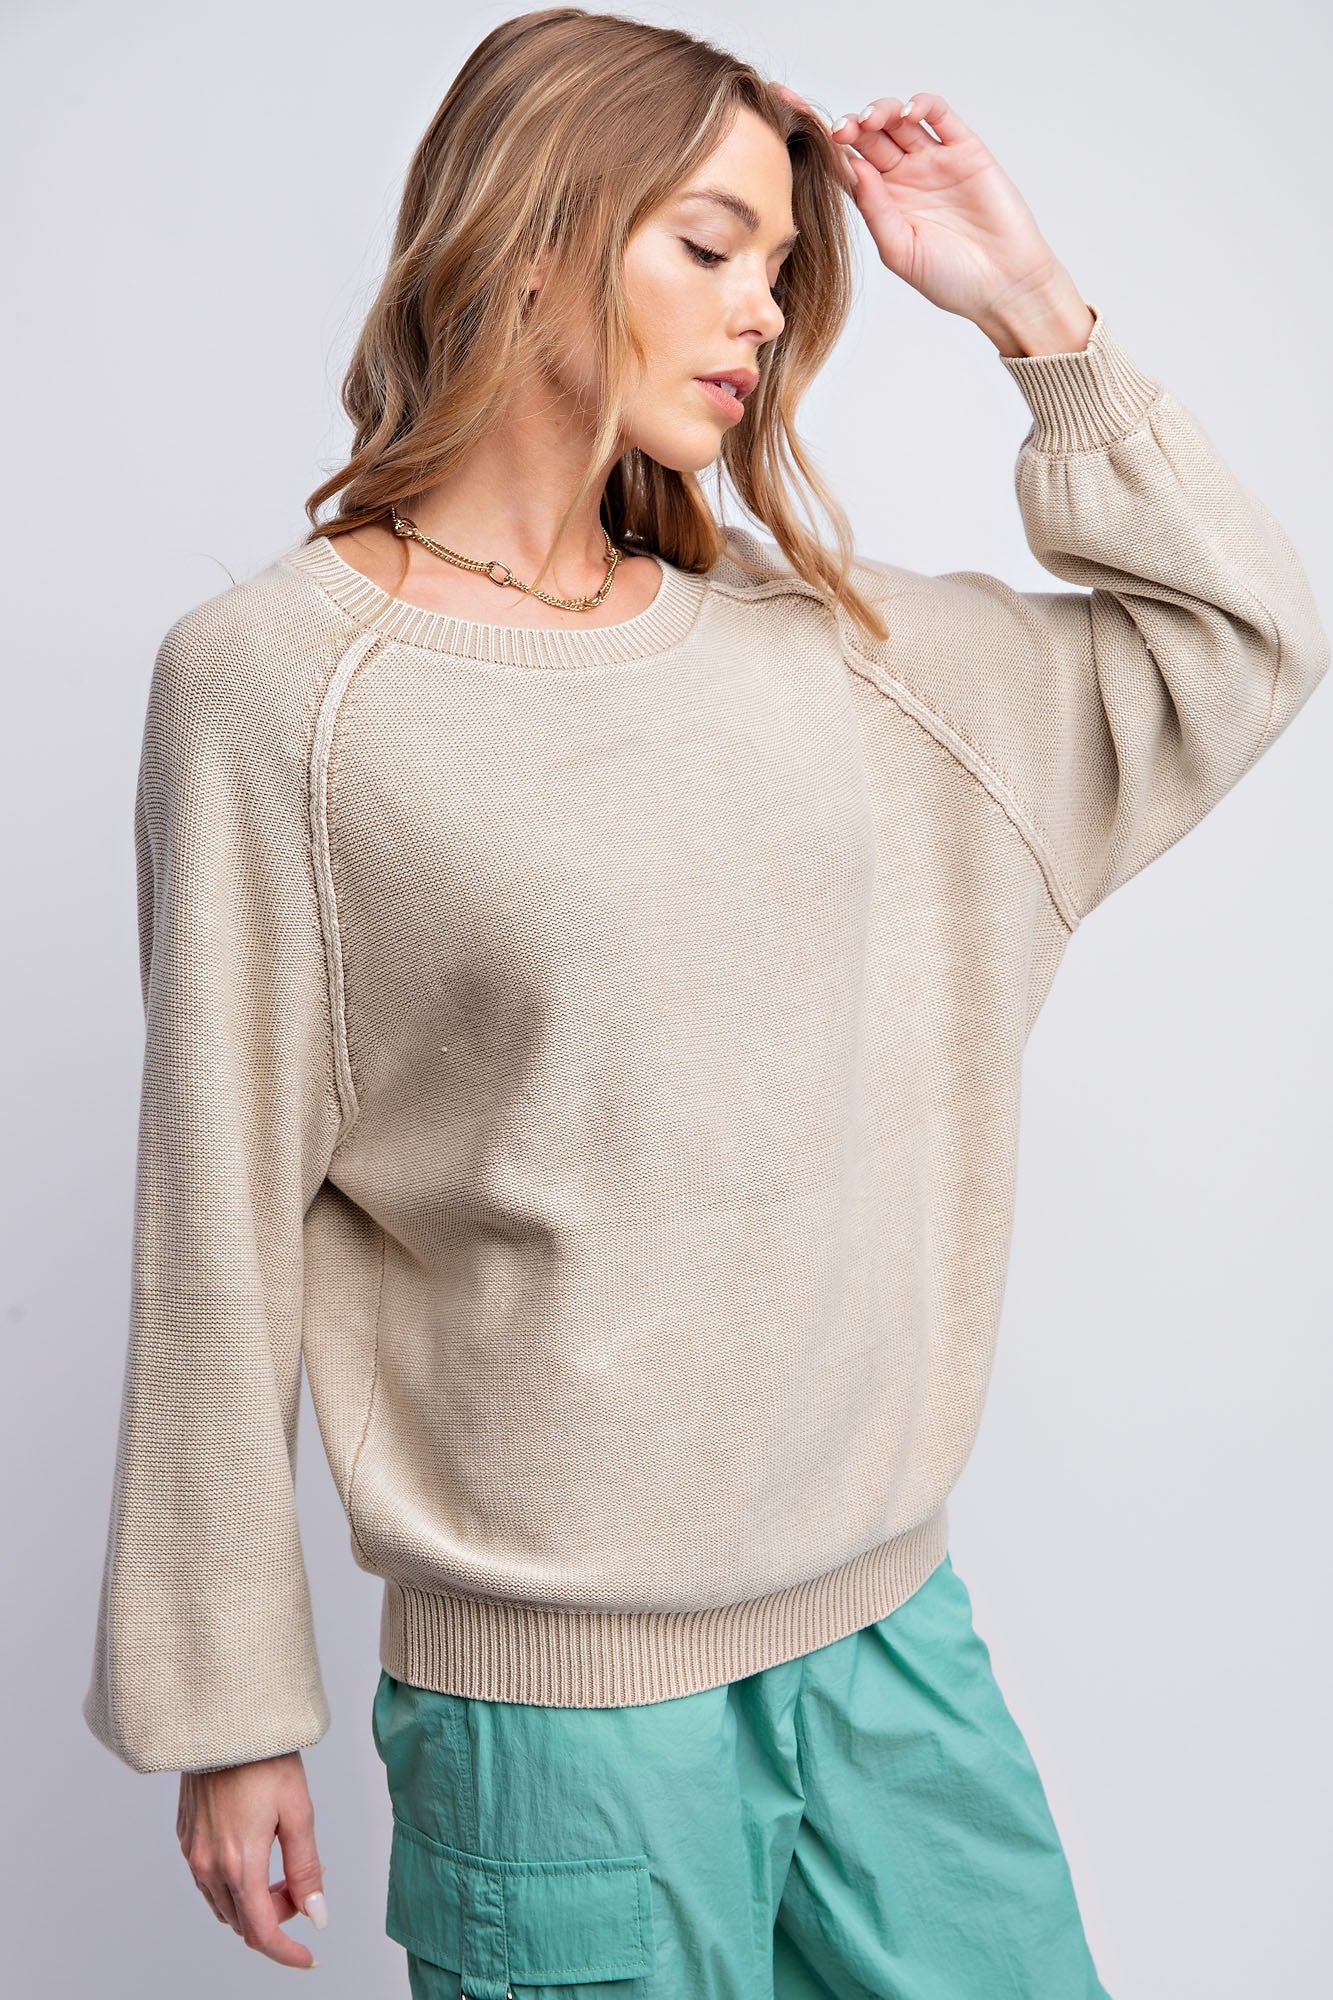 Hillary Mineral Washed Sweater